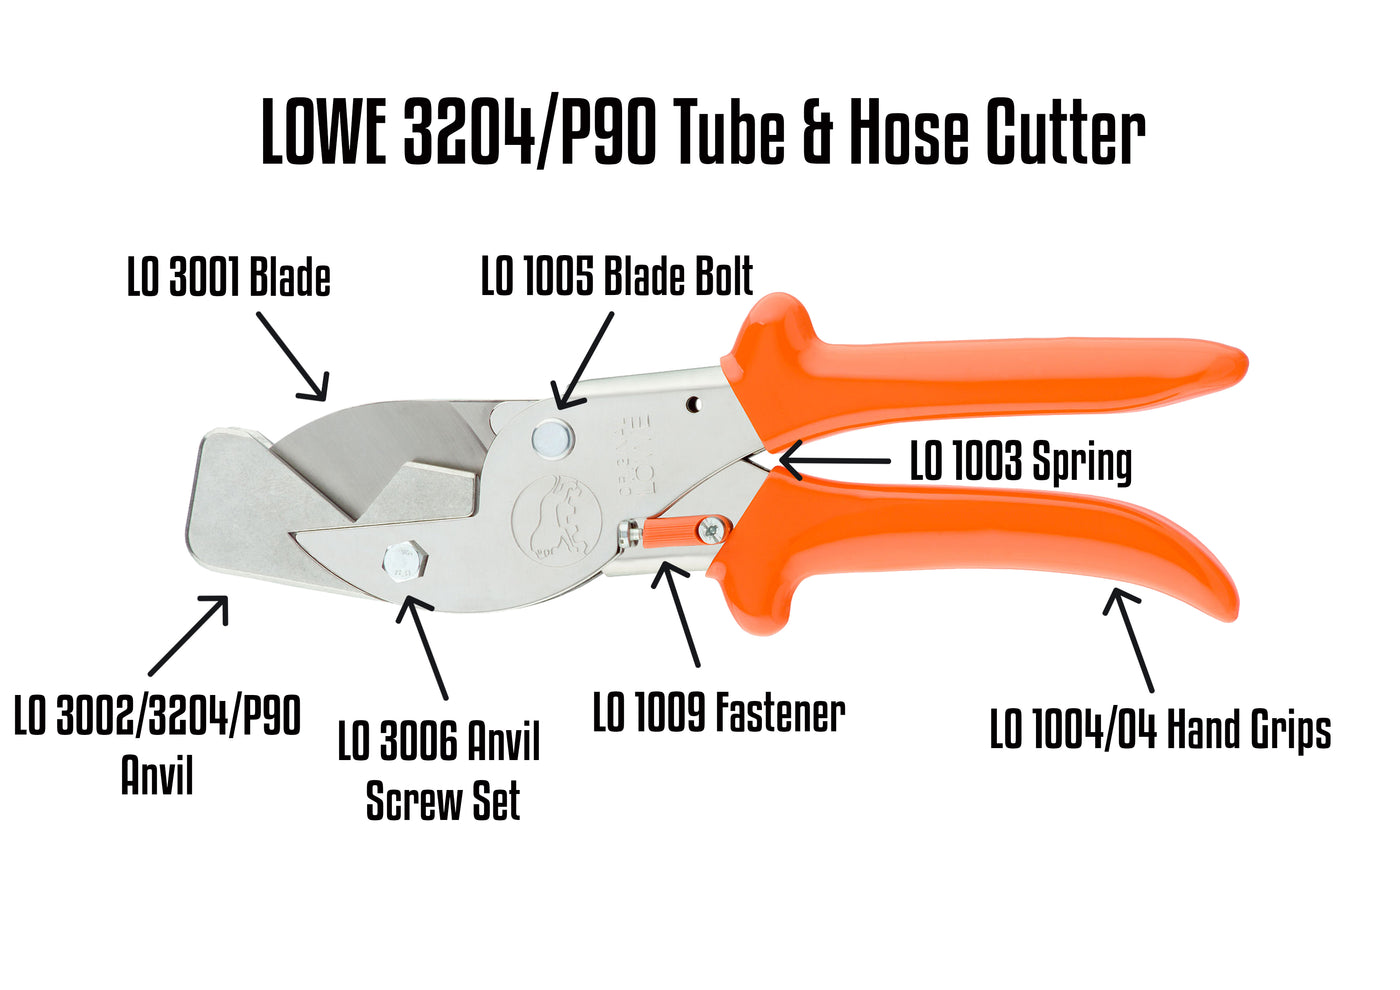 LO 3204/P90 Tube and Hose Cutter